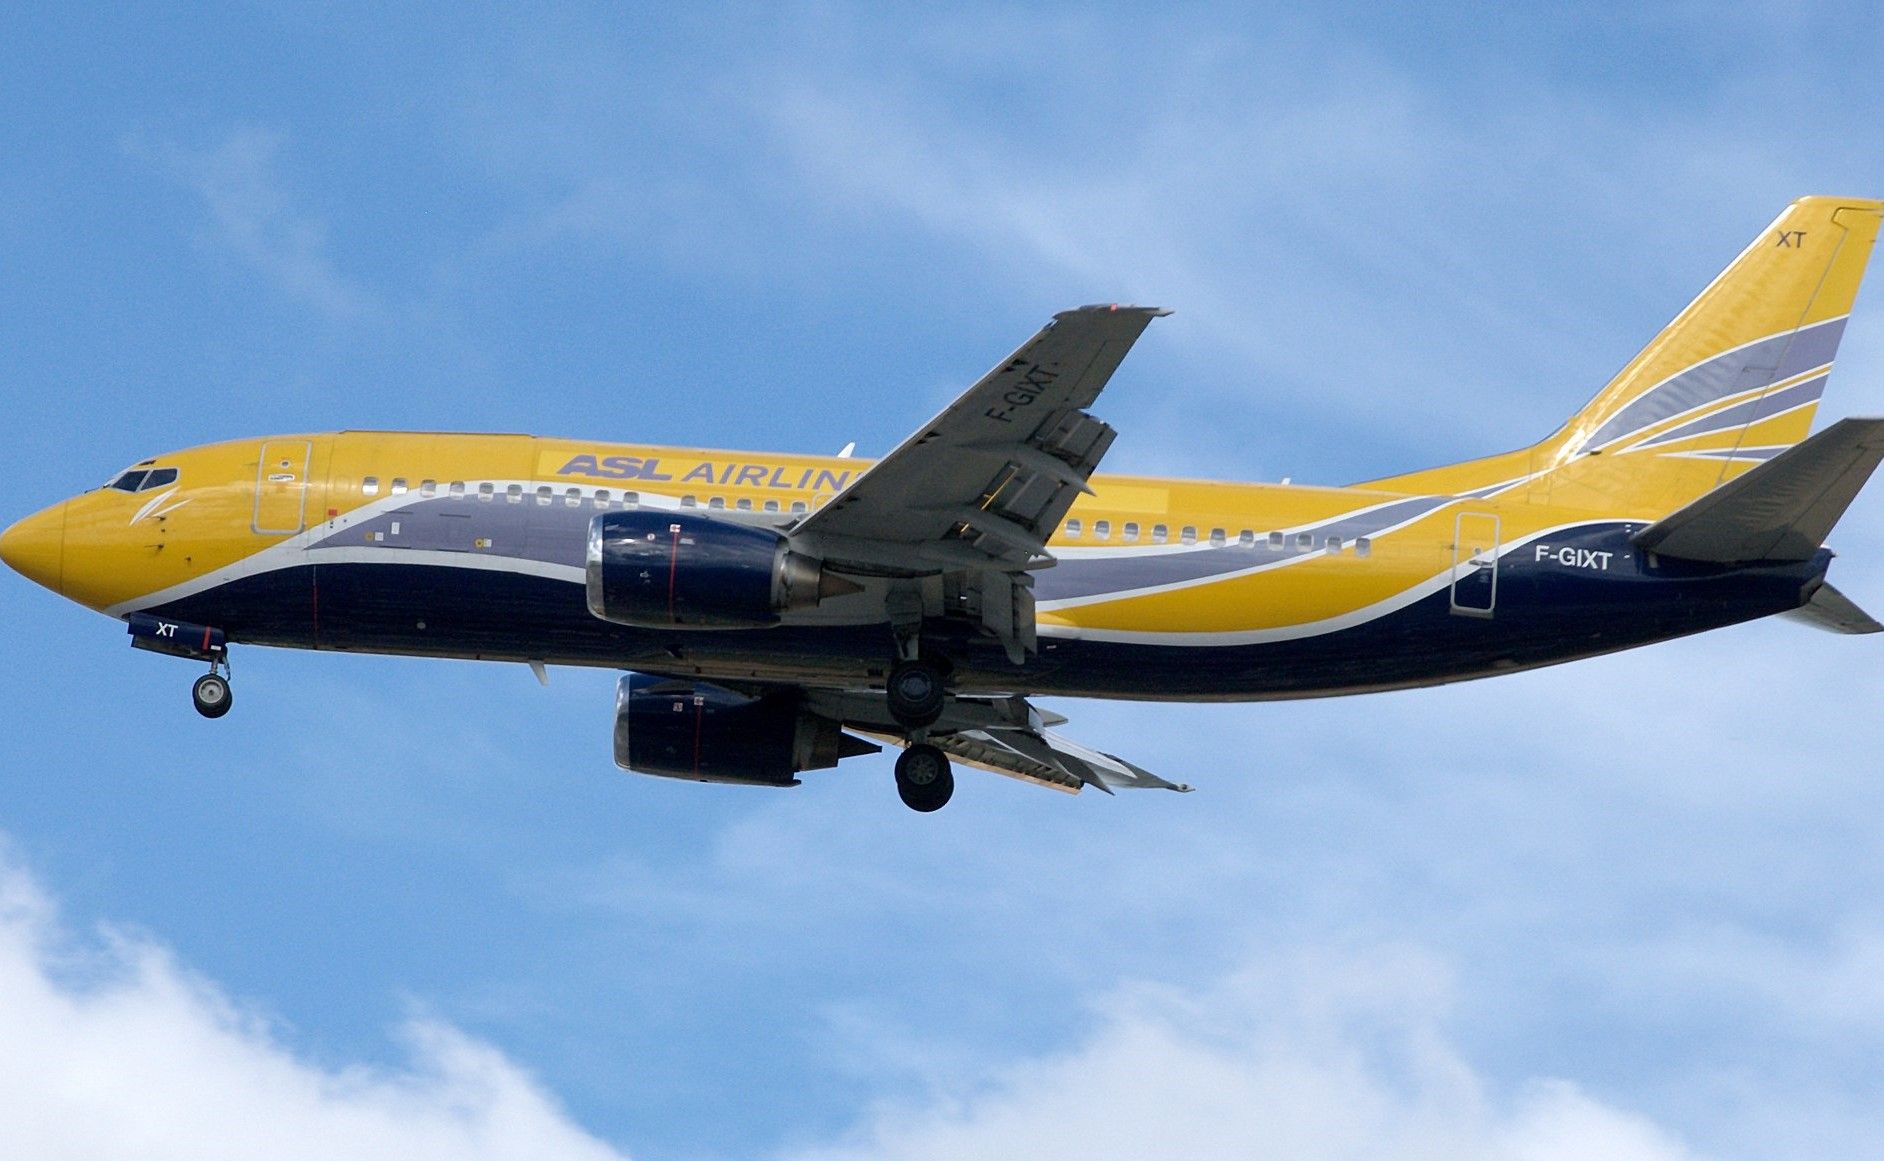 An ASL Airlines Boeing 737 flying in the sky.